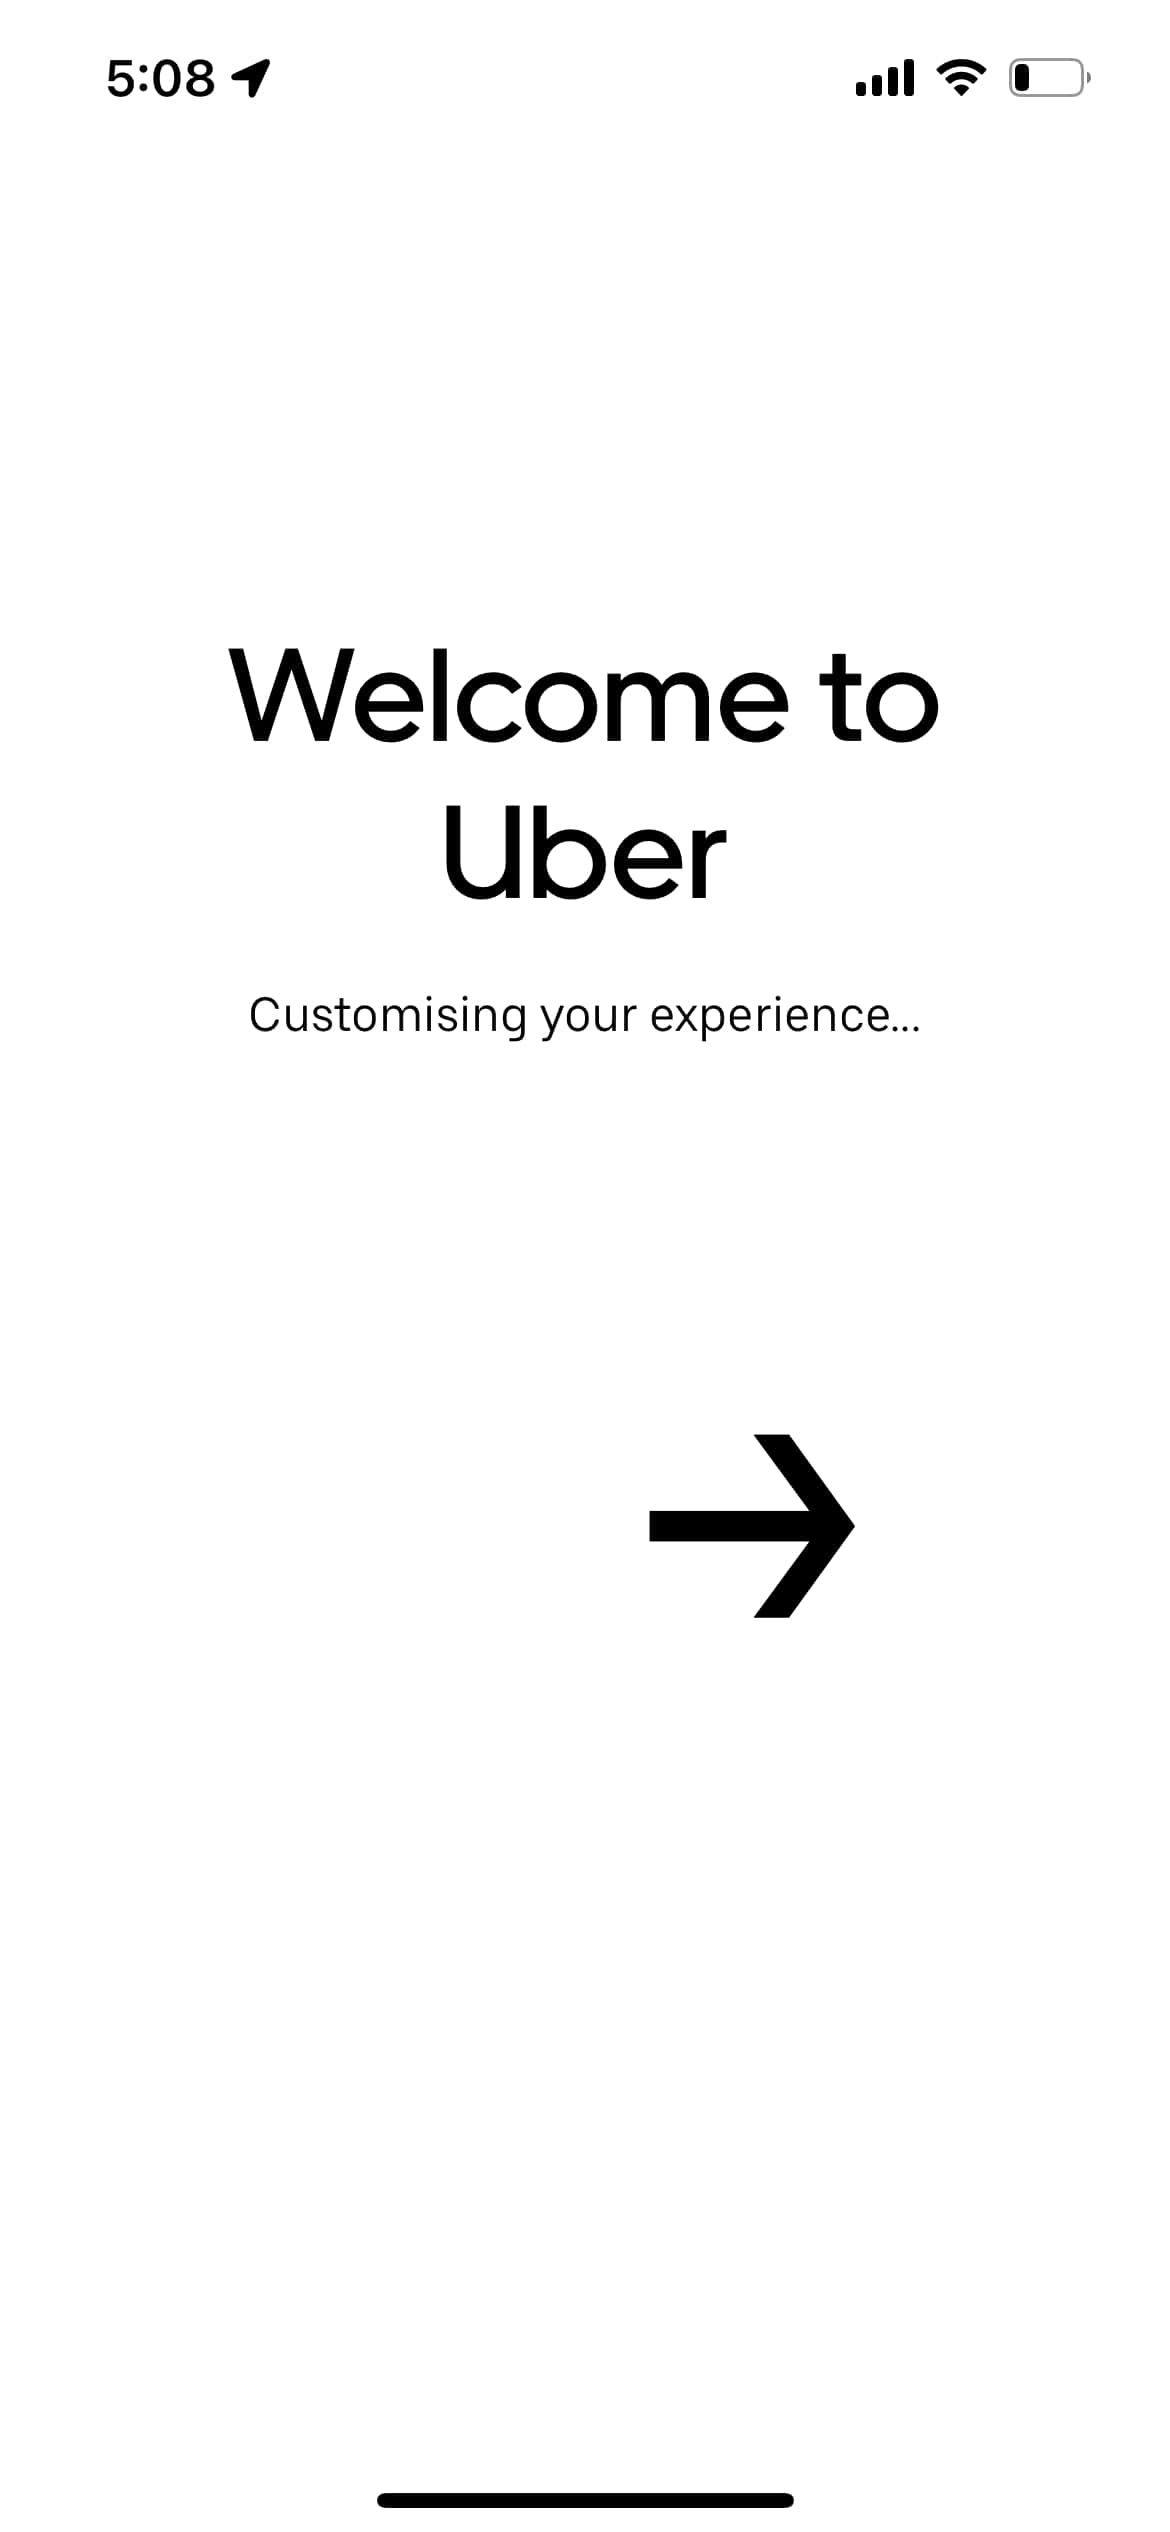 uber app welcome page